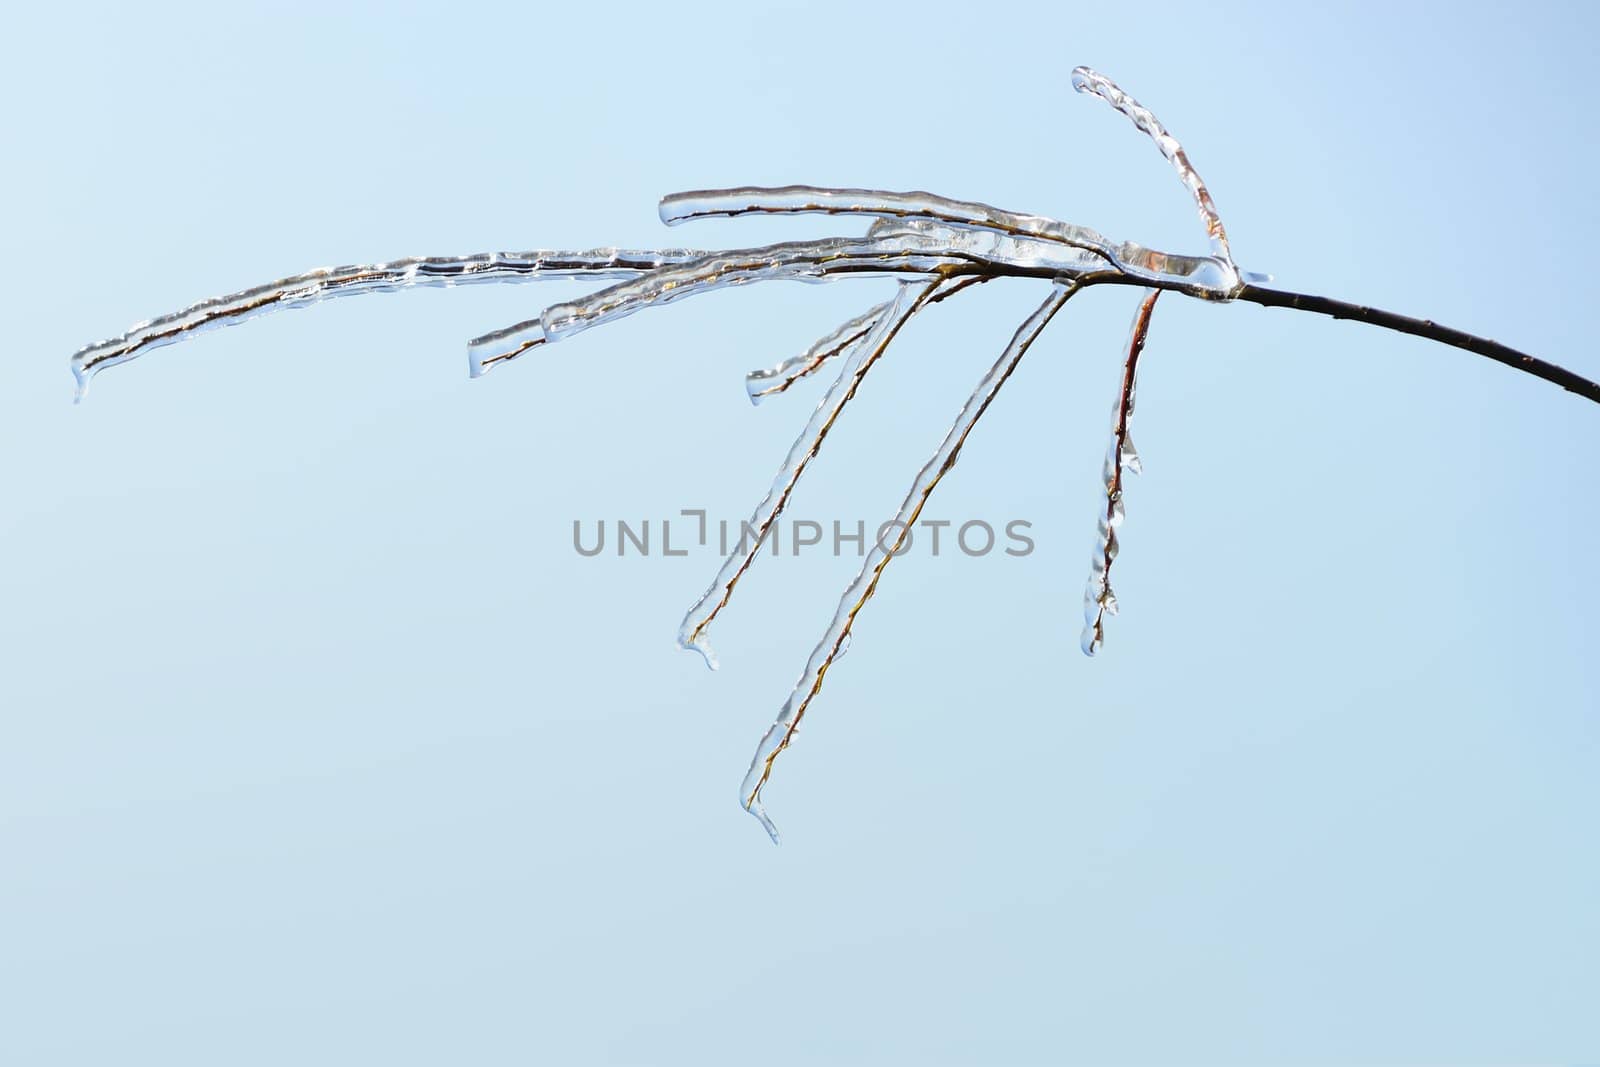 Icy tree branches by raywoo